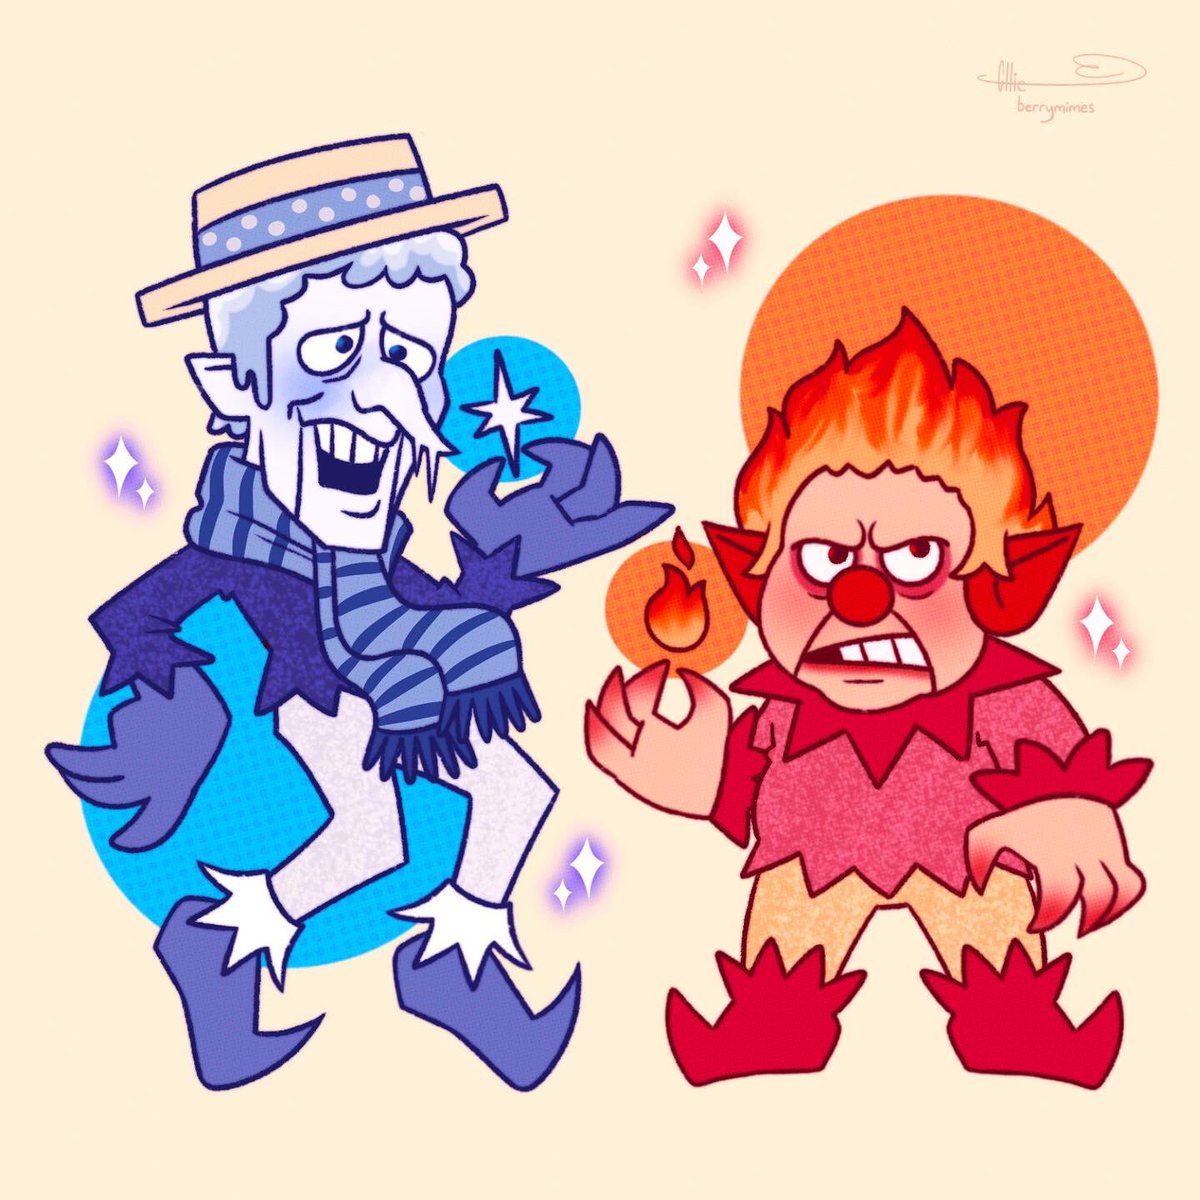 They’re too much! ❄️🔥
Happy Holidays everyone :D
#rankinbass